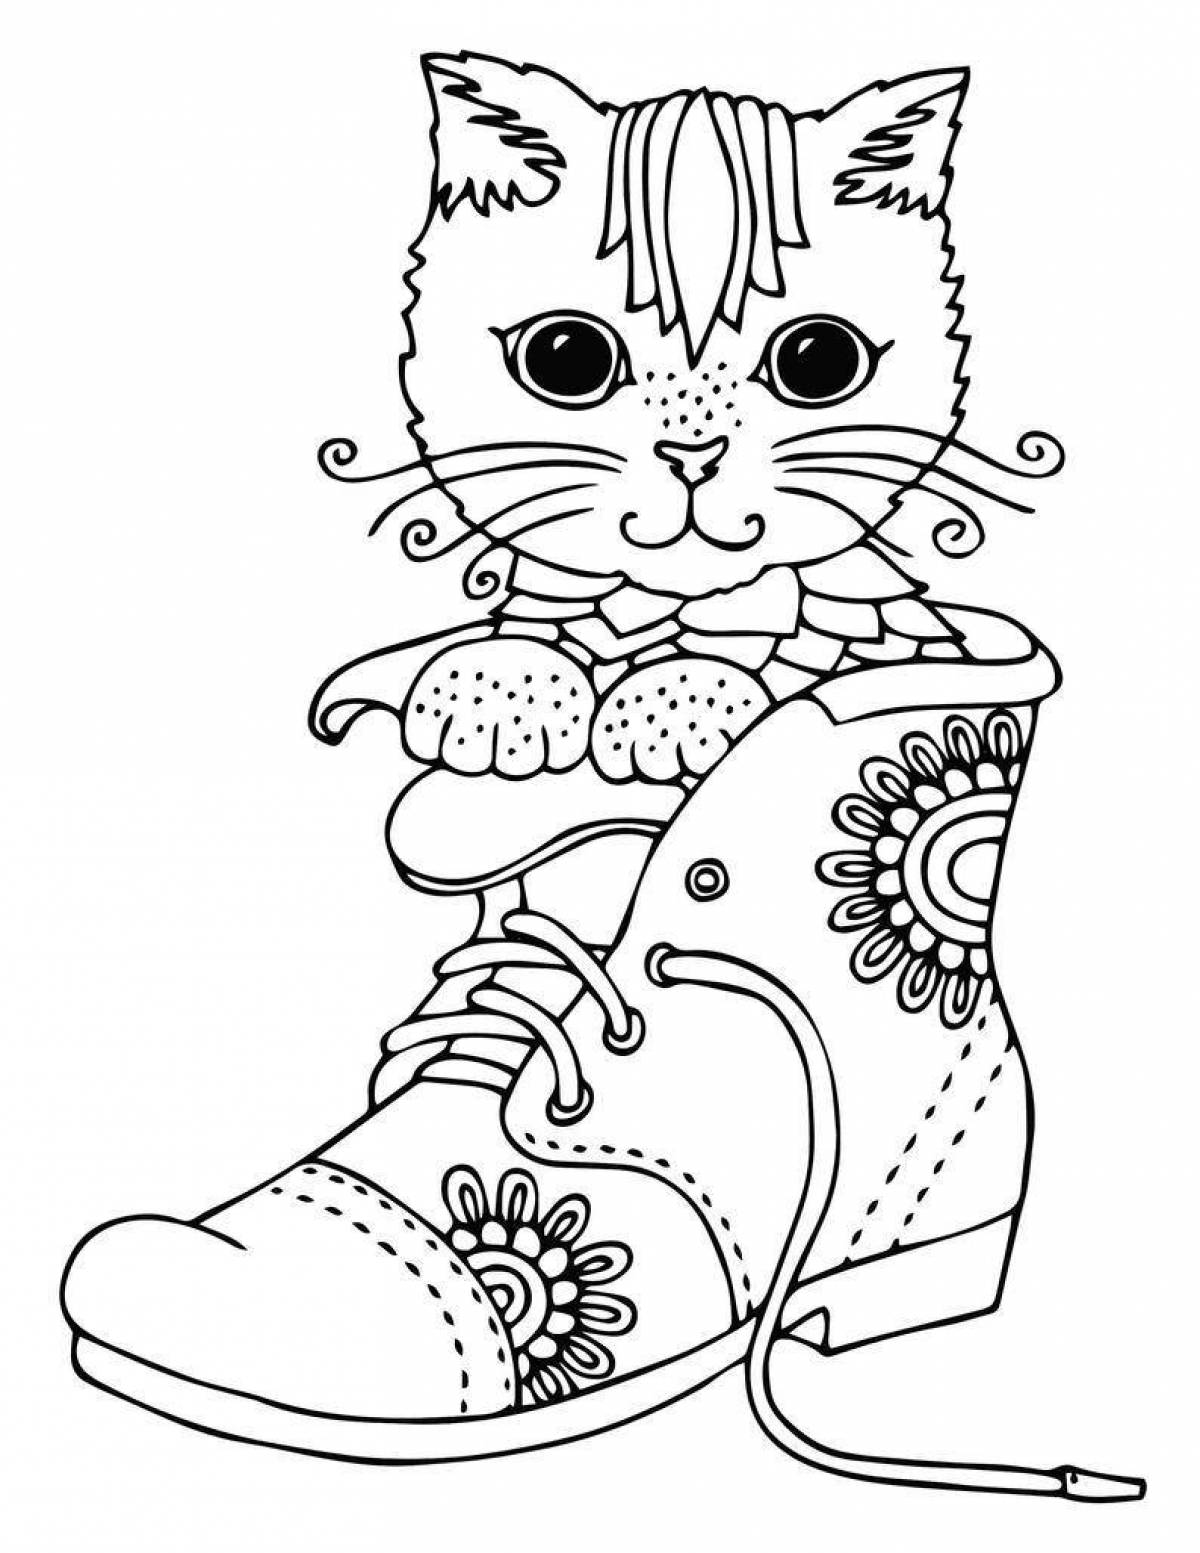 Attractive whiskas cat coloring page